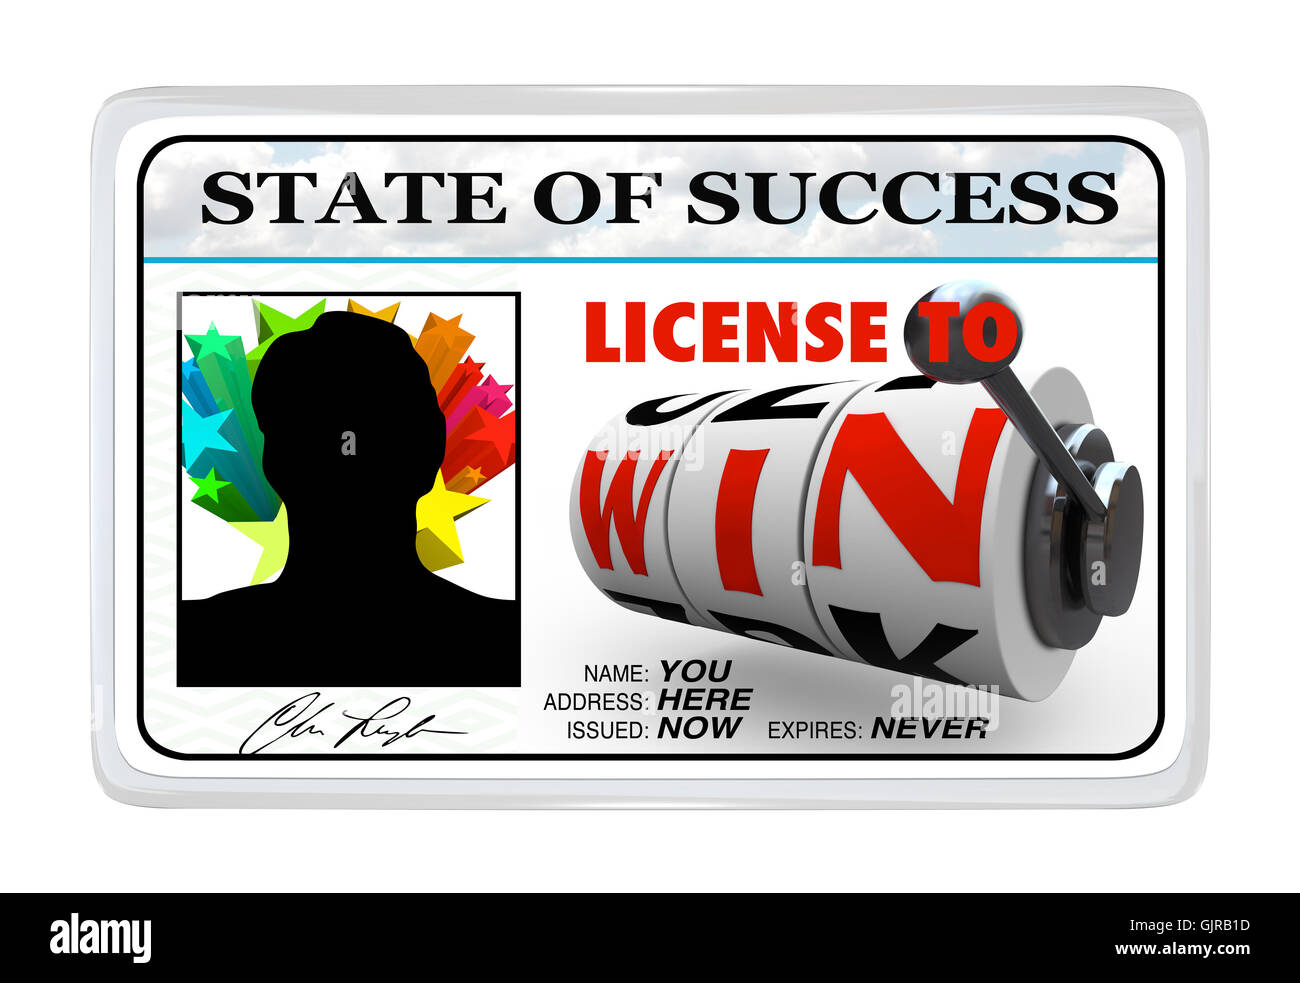 License to Win Laminated ID Card Opportunity for Success Stock Photo